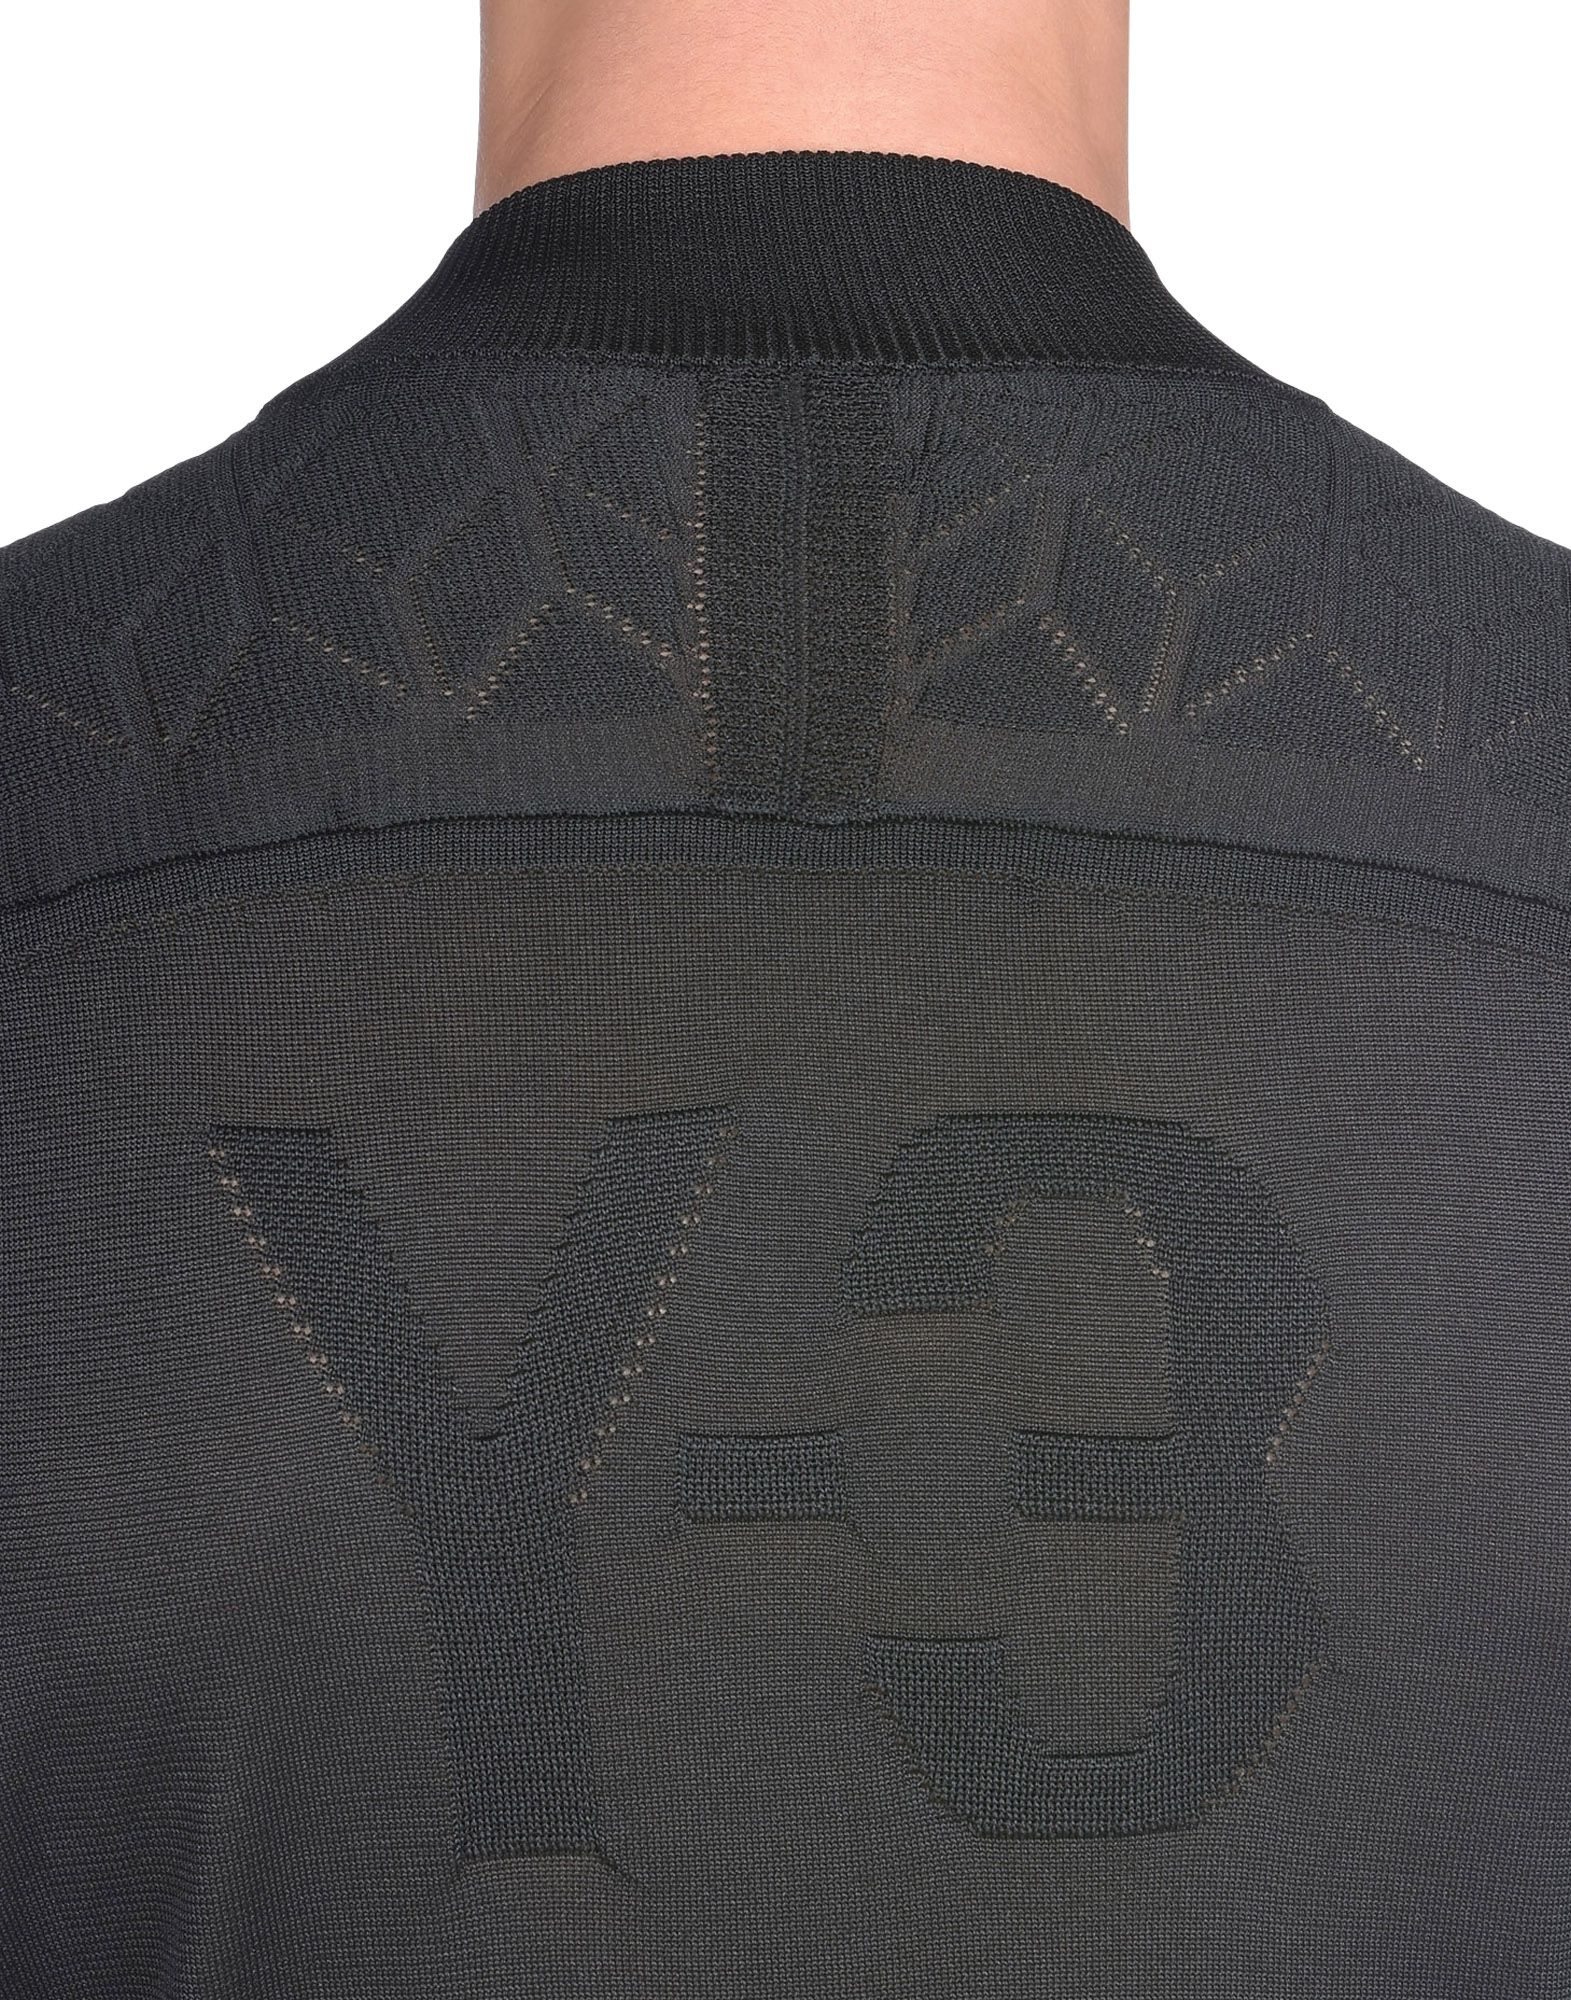 Y 3 KNIT BOMBER JACKET for Men | Adidas Y-3 Official Store